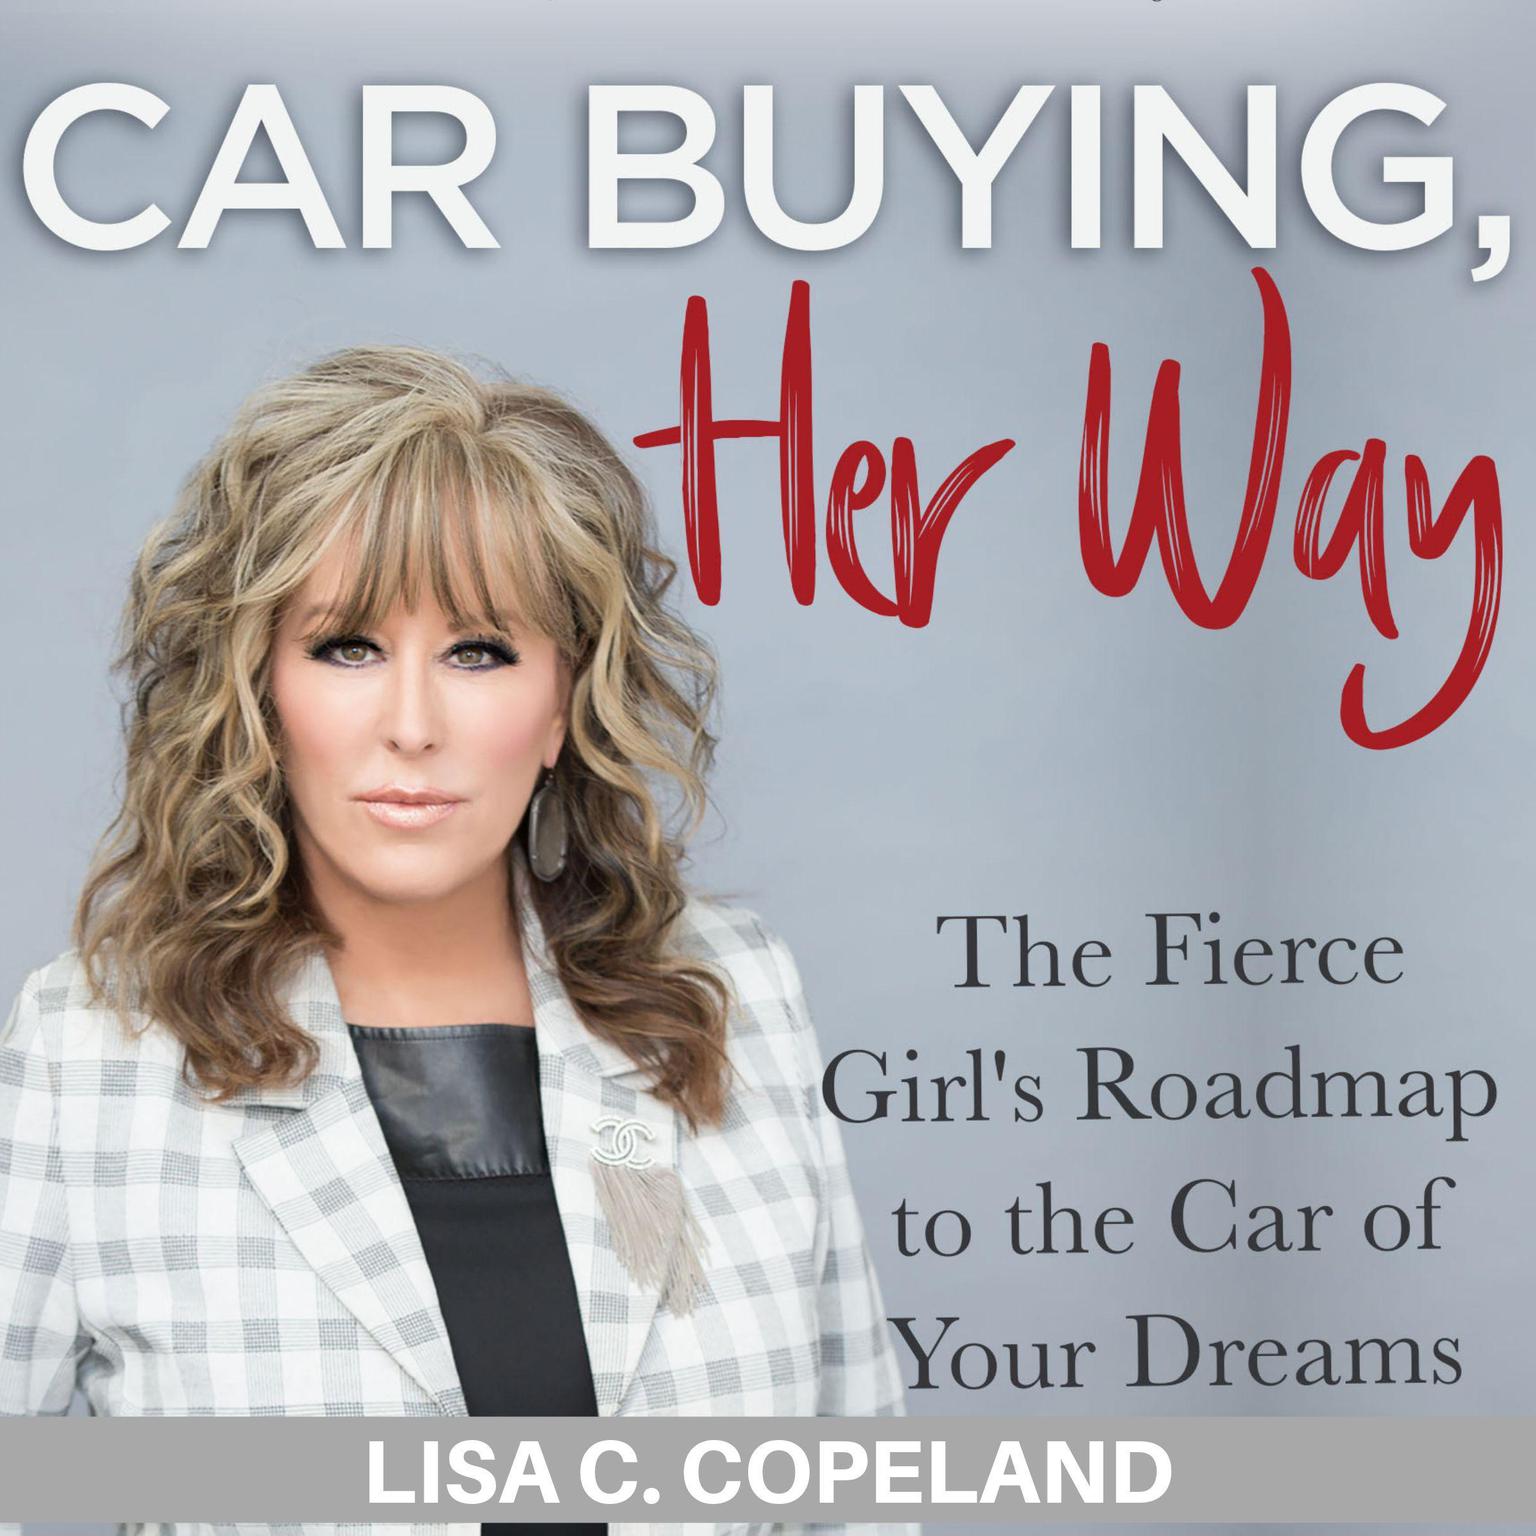 Car Buying Her Way: The Fierce Girl’s Roadmap to the Car of Your Dreams Audiobook, by Lisa C. Copeland